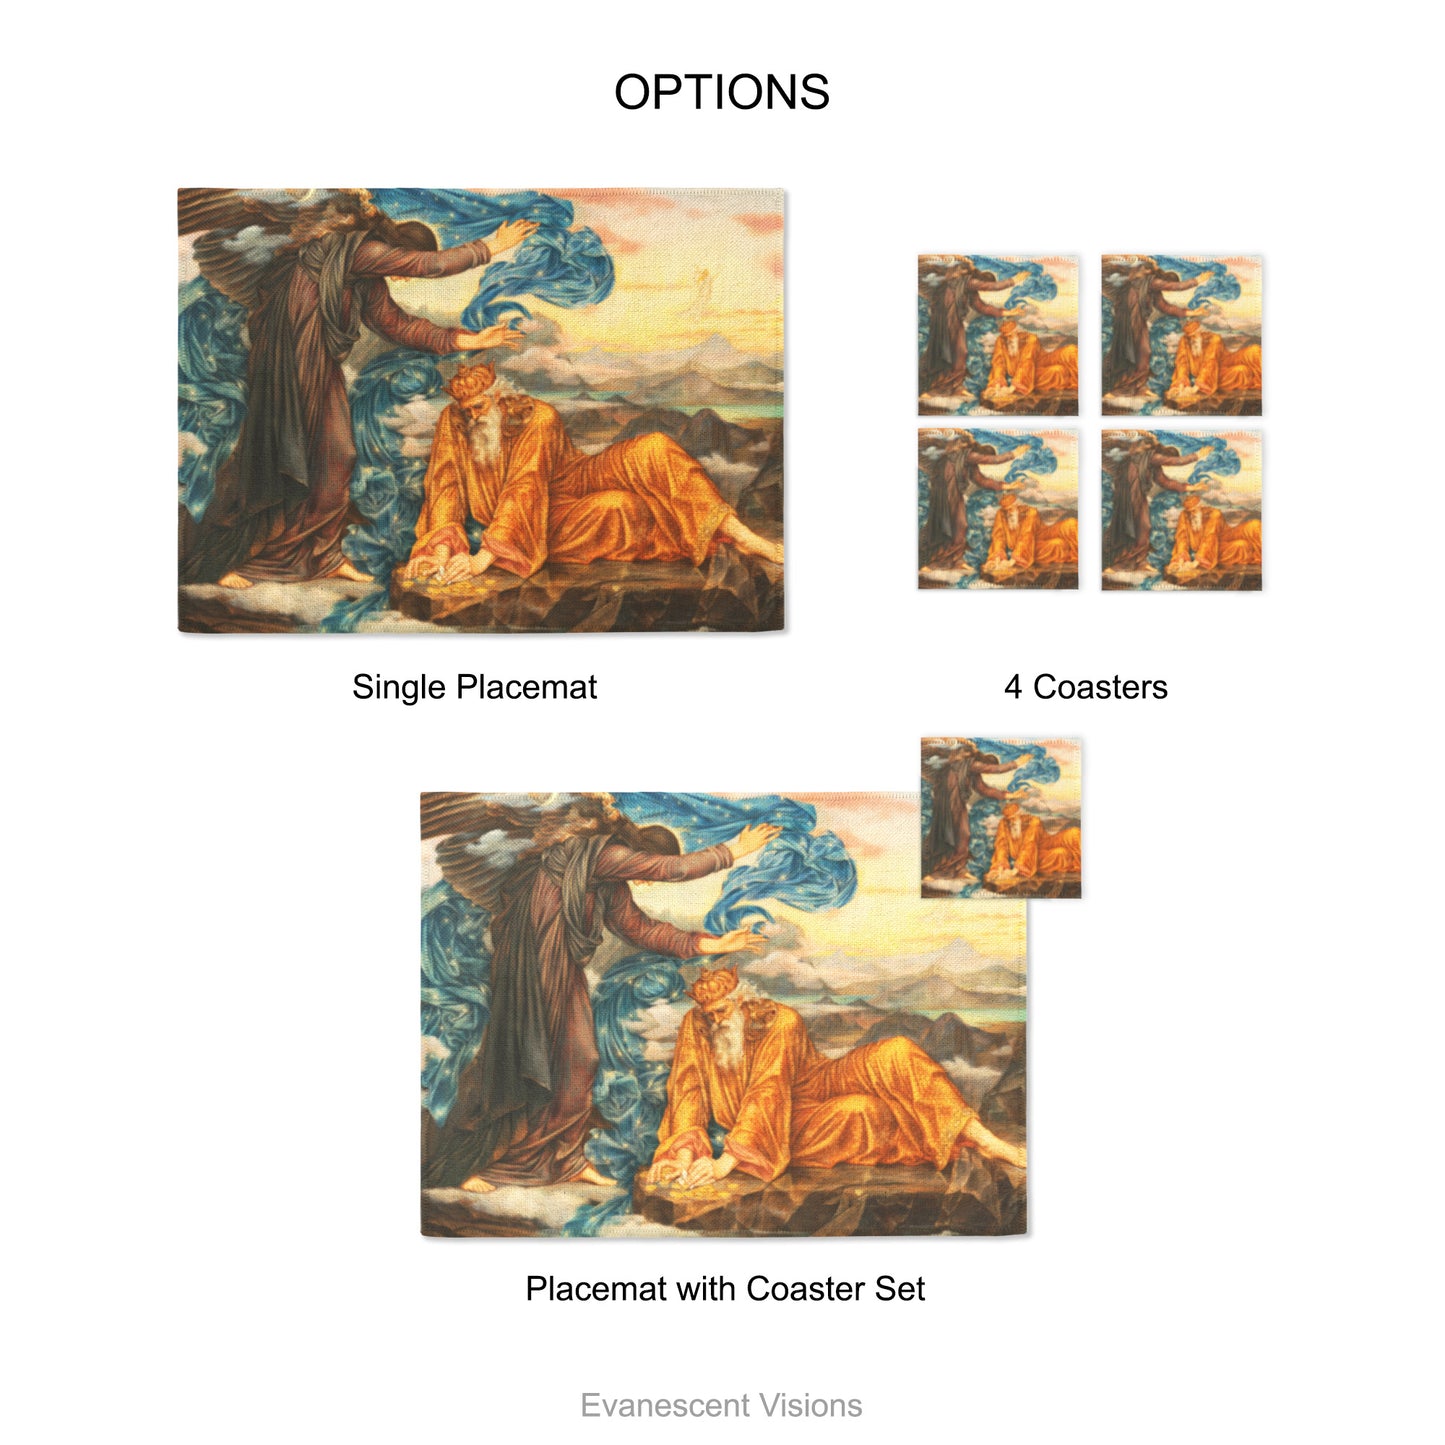 Placemat and coaster with design of 'Earthbound' by artist Evelyn De Morgan (1855–1919).  Product options shows single placemat, set of 4 coasters and placemat with coaster set.